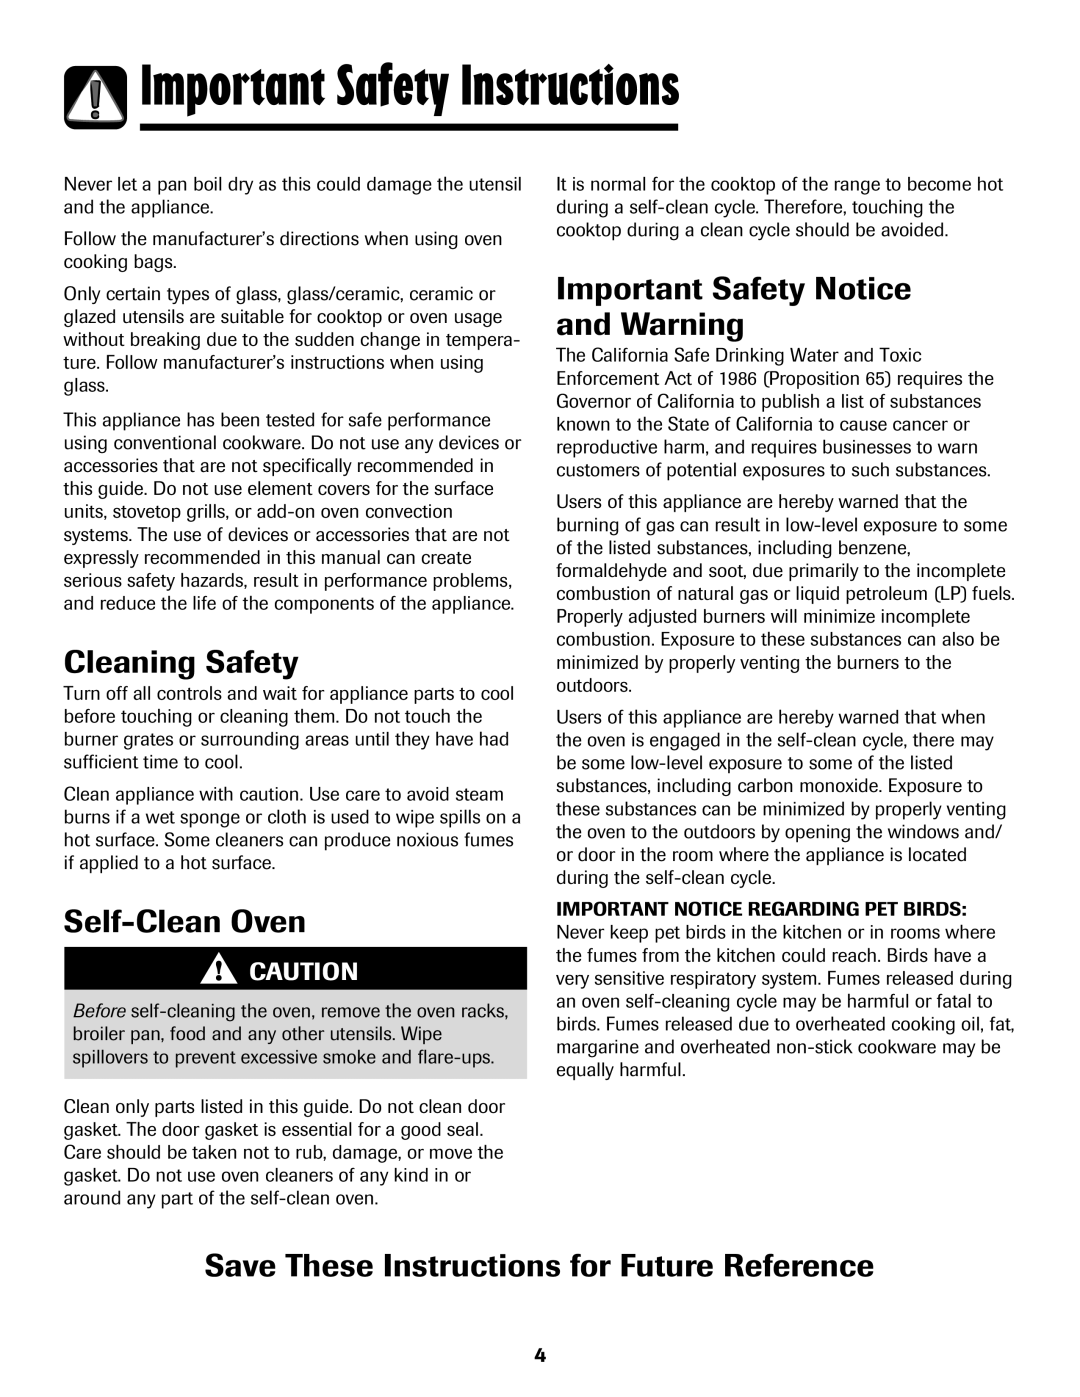 Maytag 700 manual Cleaning Safety, Self-Clean Oven, Important Safety Notice and Warning, Important Safety Instructions 